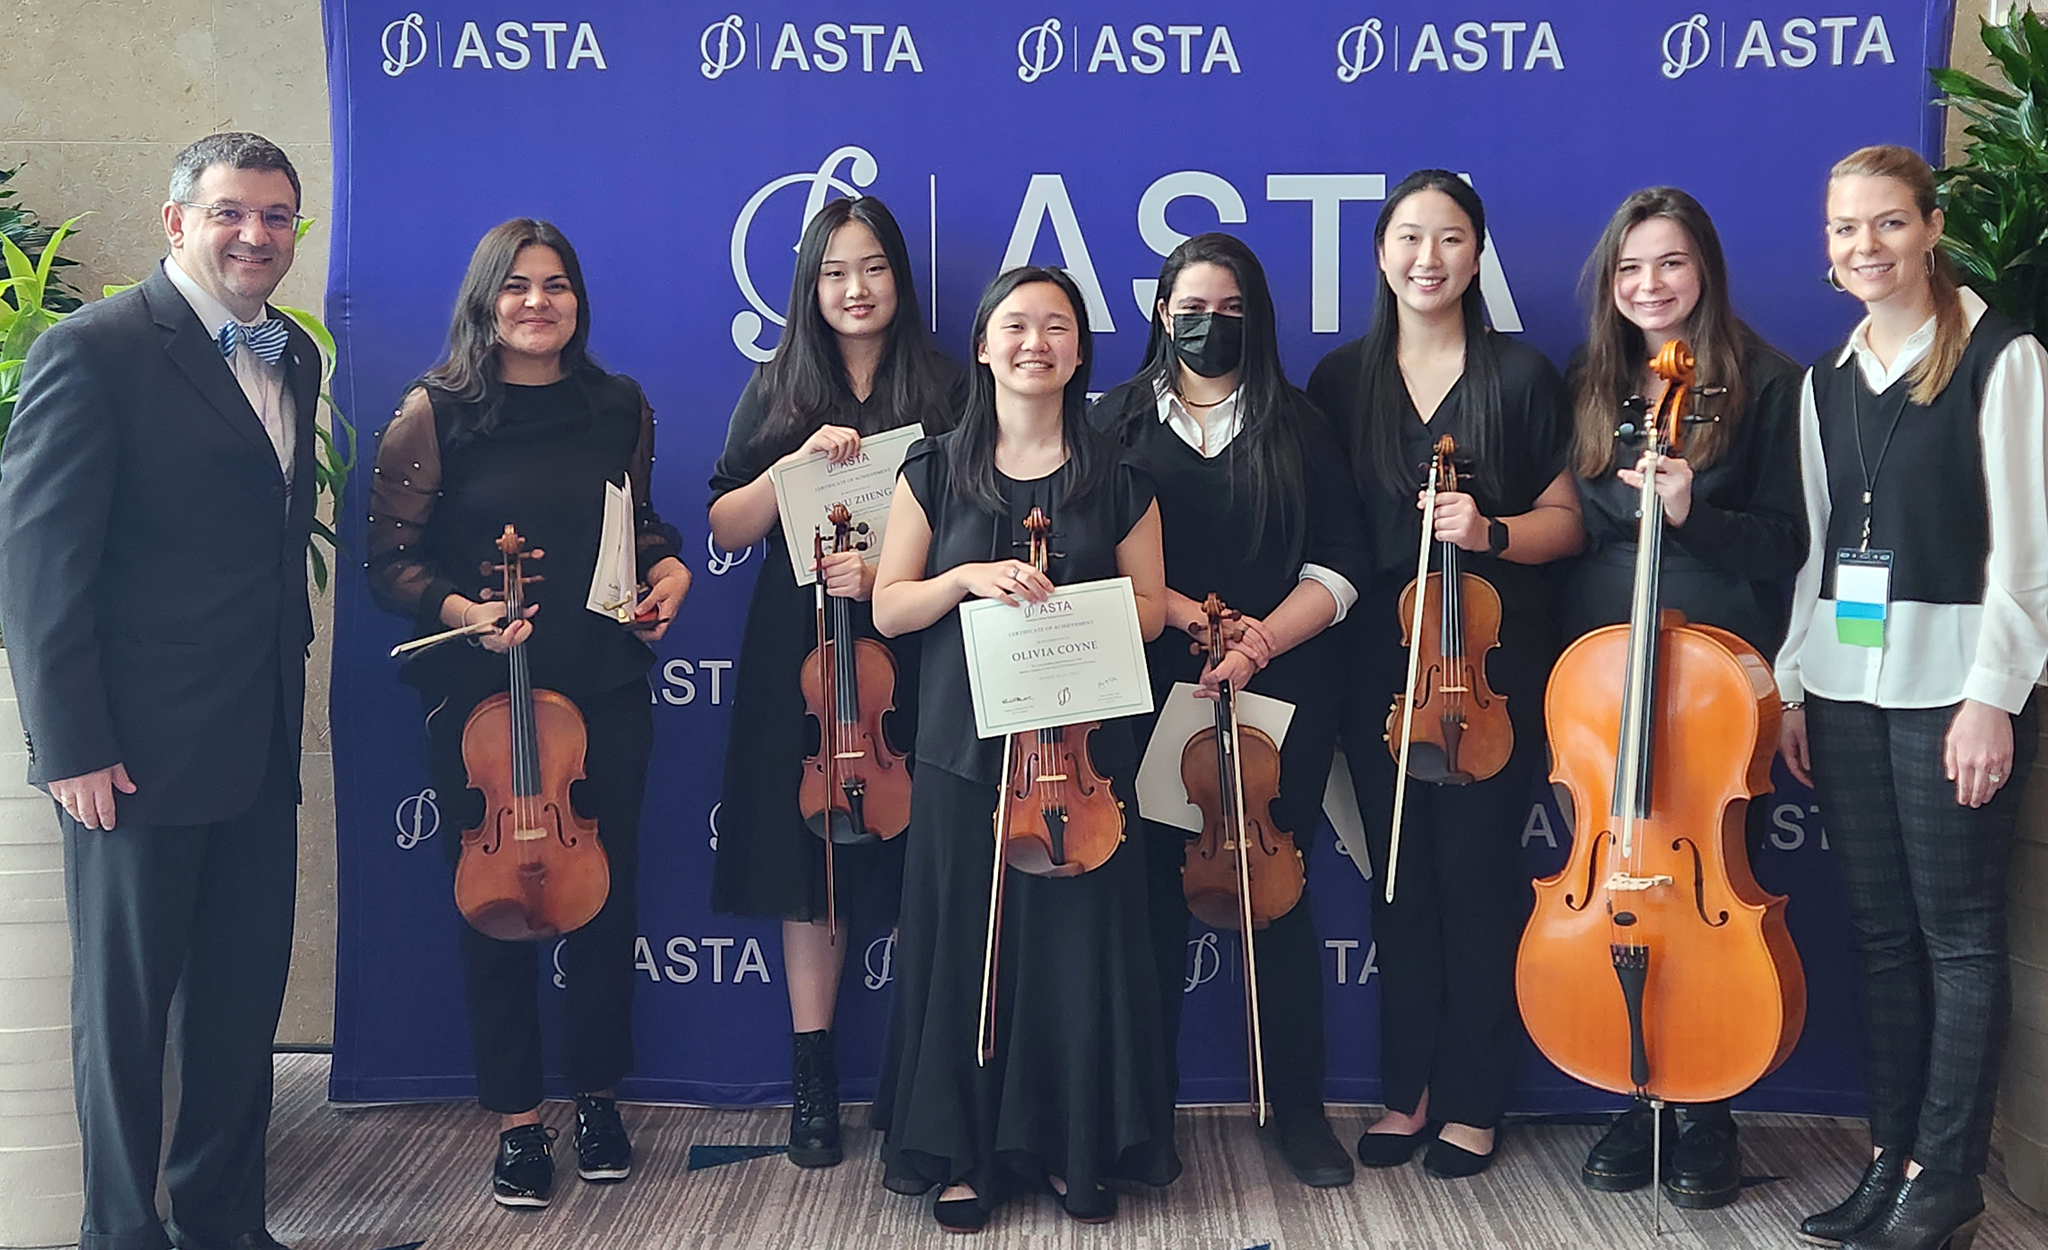 Music professor Selim Giray (left) accompanies Ole Miss music students Paola Betanco, Keyu Zheng, Olivia Coyne, River DioLallevi, Linna Zheng and Holly Bleeden, and instructor Christine Kralik at the American String Teachers Association’s national conference in Orlando, Florida. The students were chosen through a competitive audition process to perform at the conference. Submitted photo